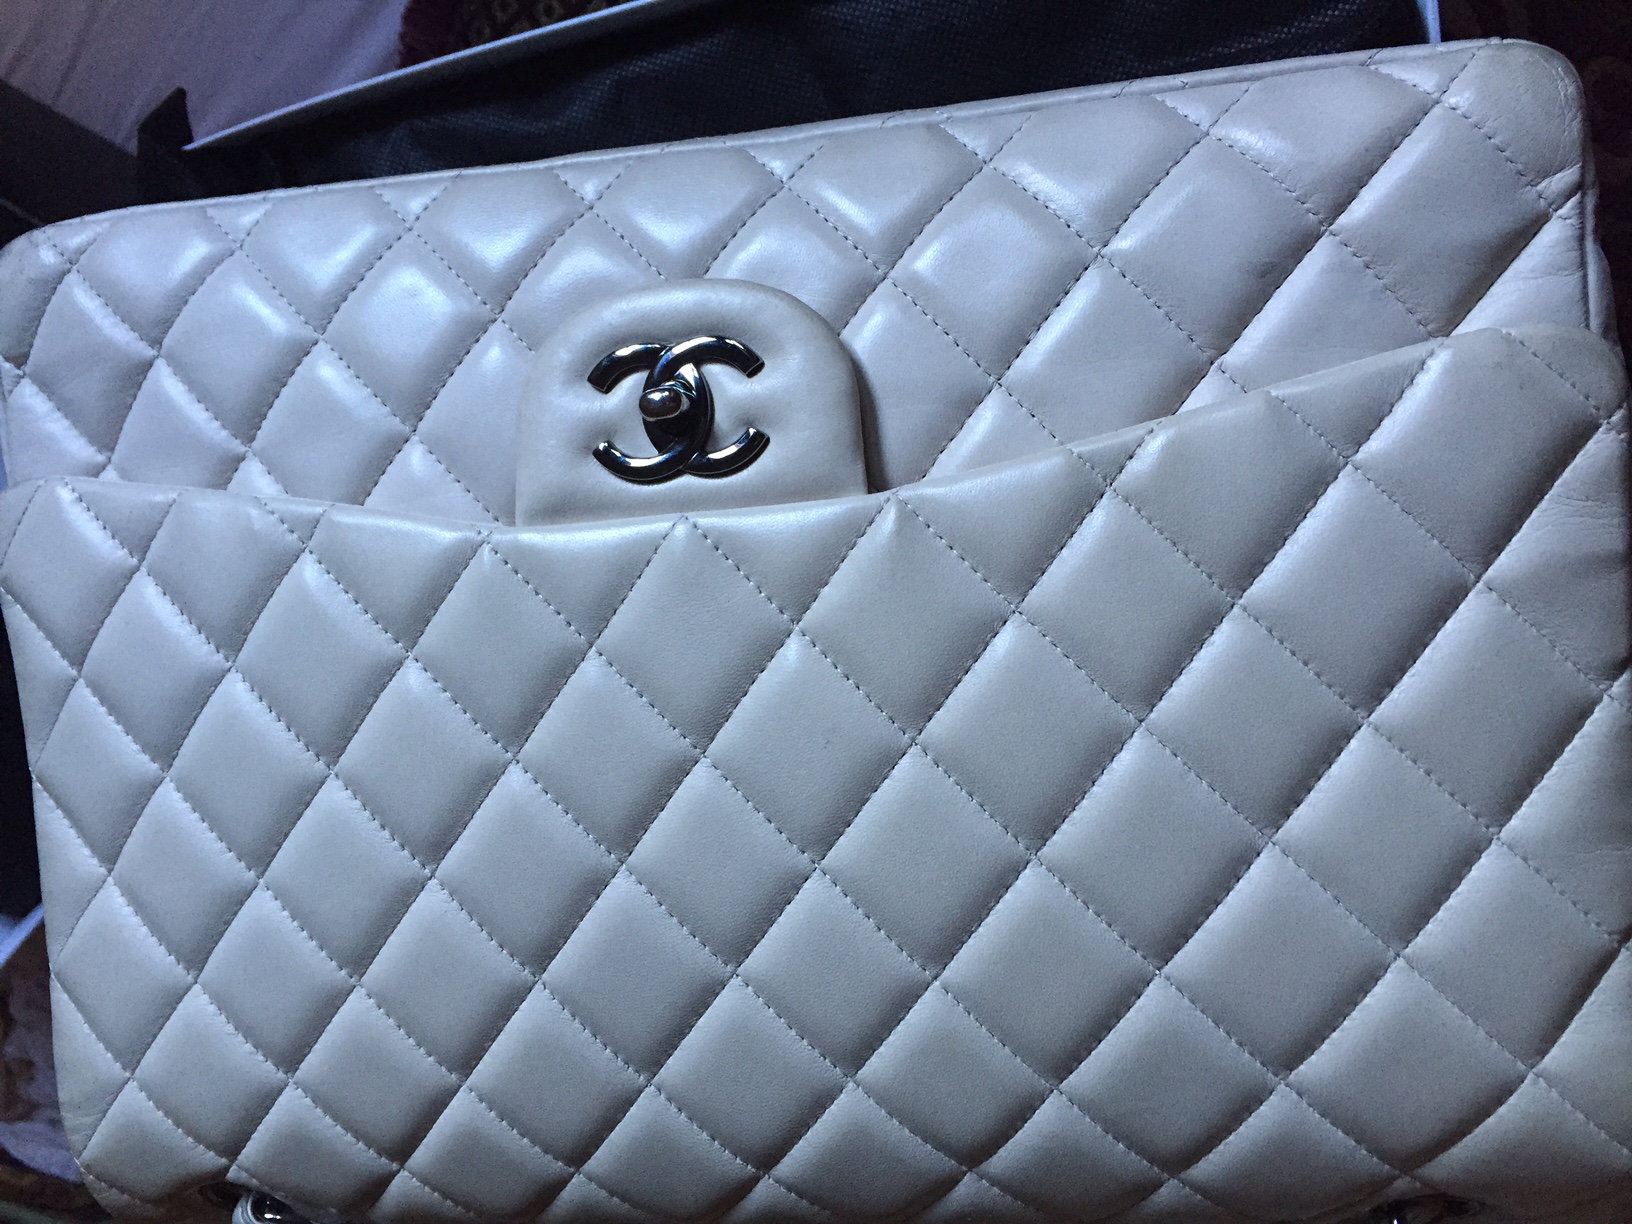 Chanel - White Lambskin Bag - cleaning needed?